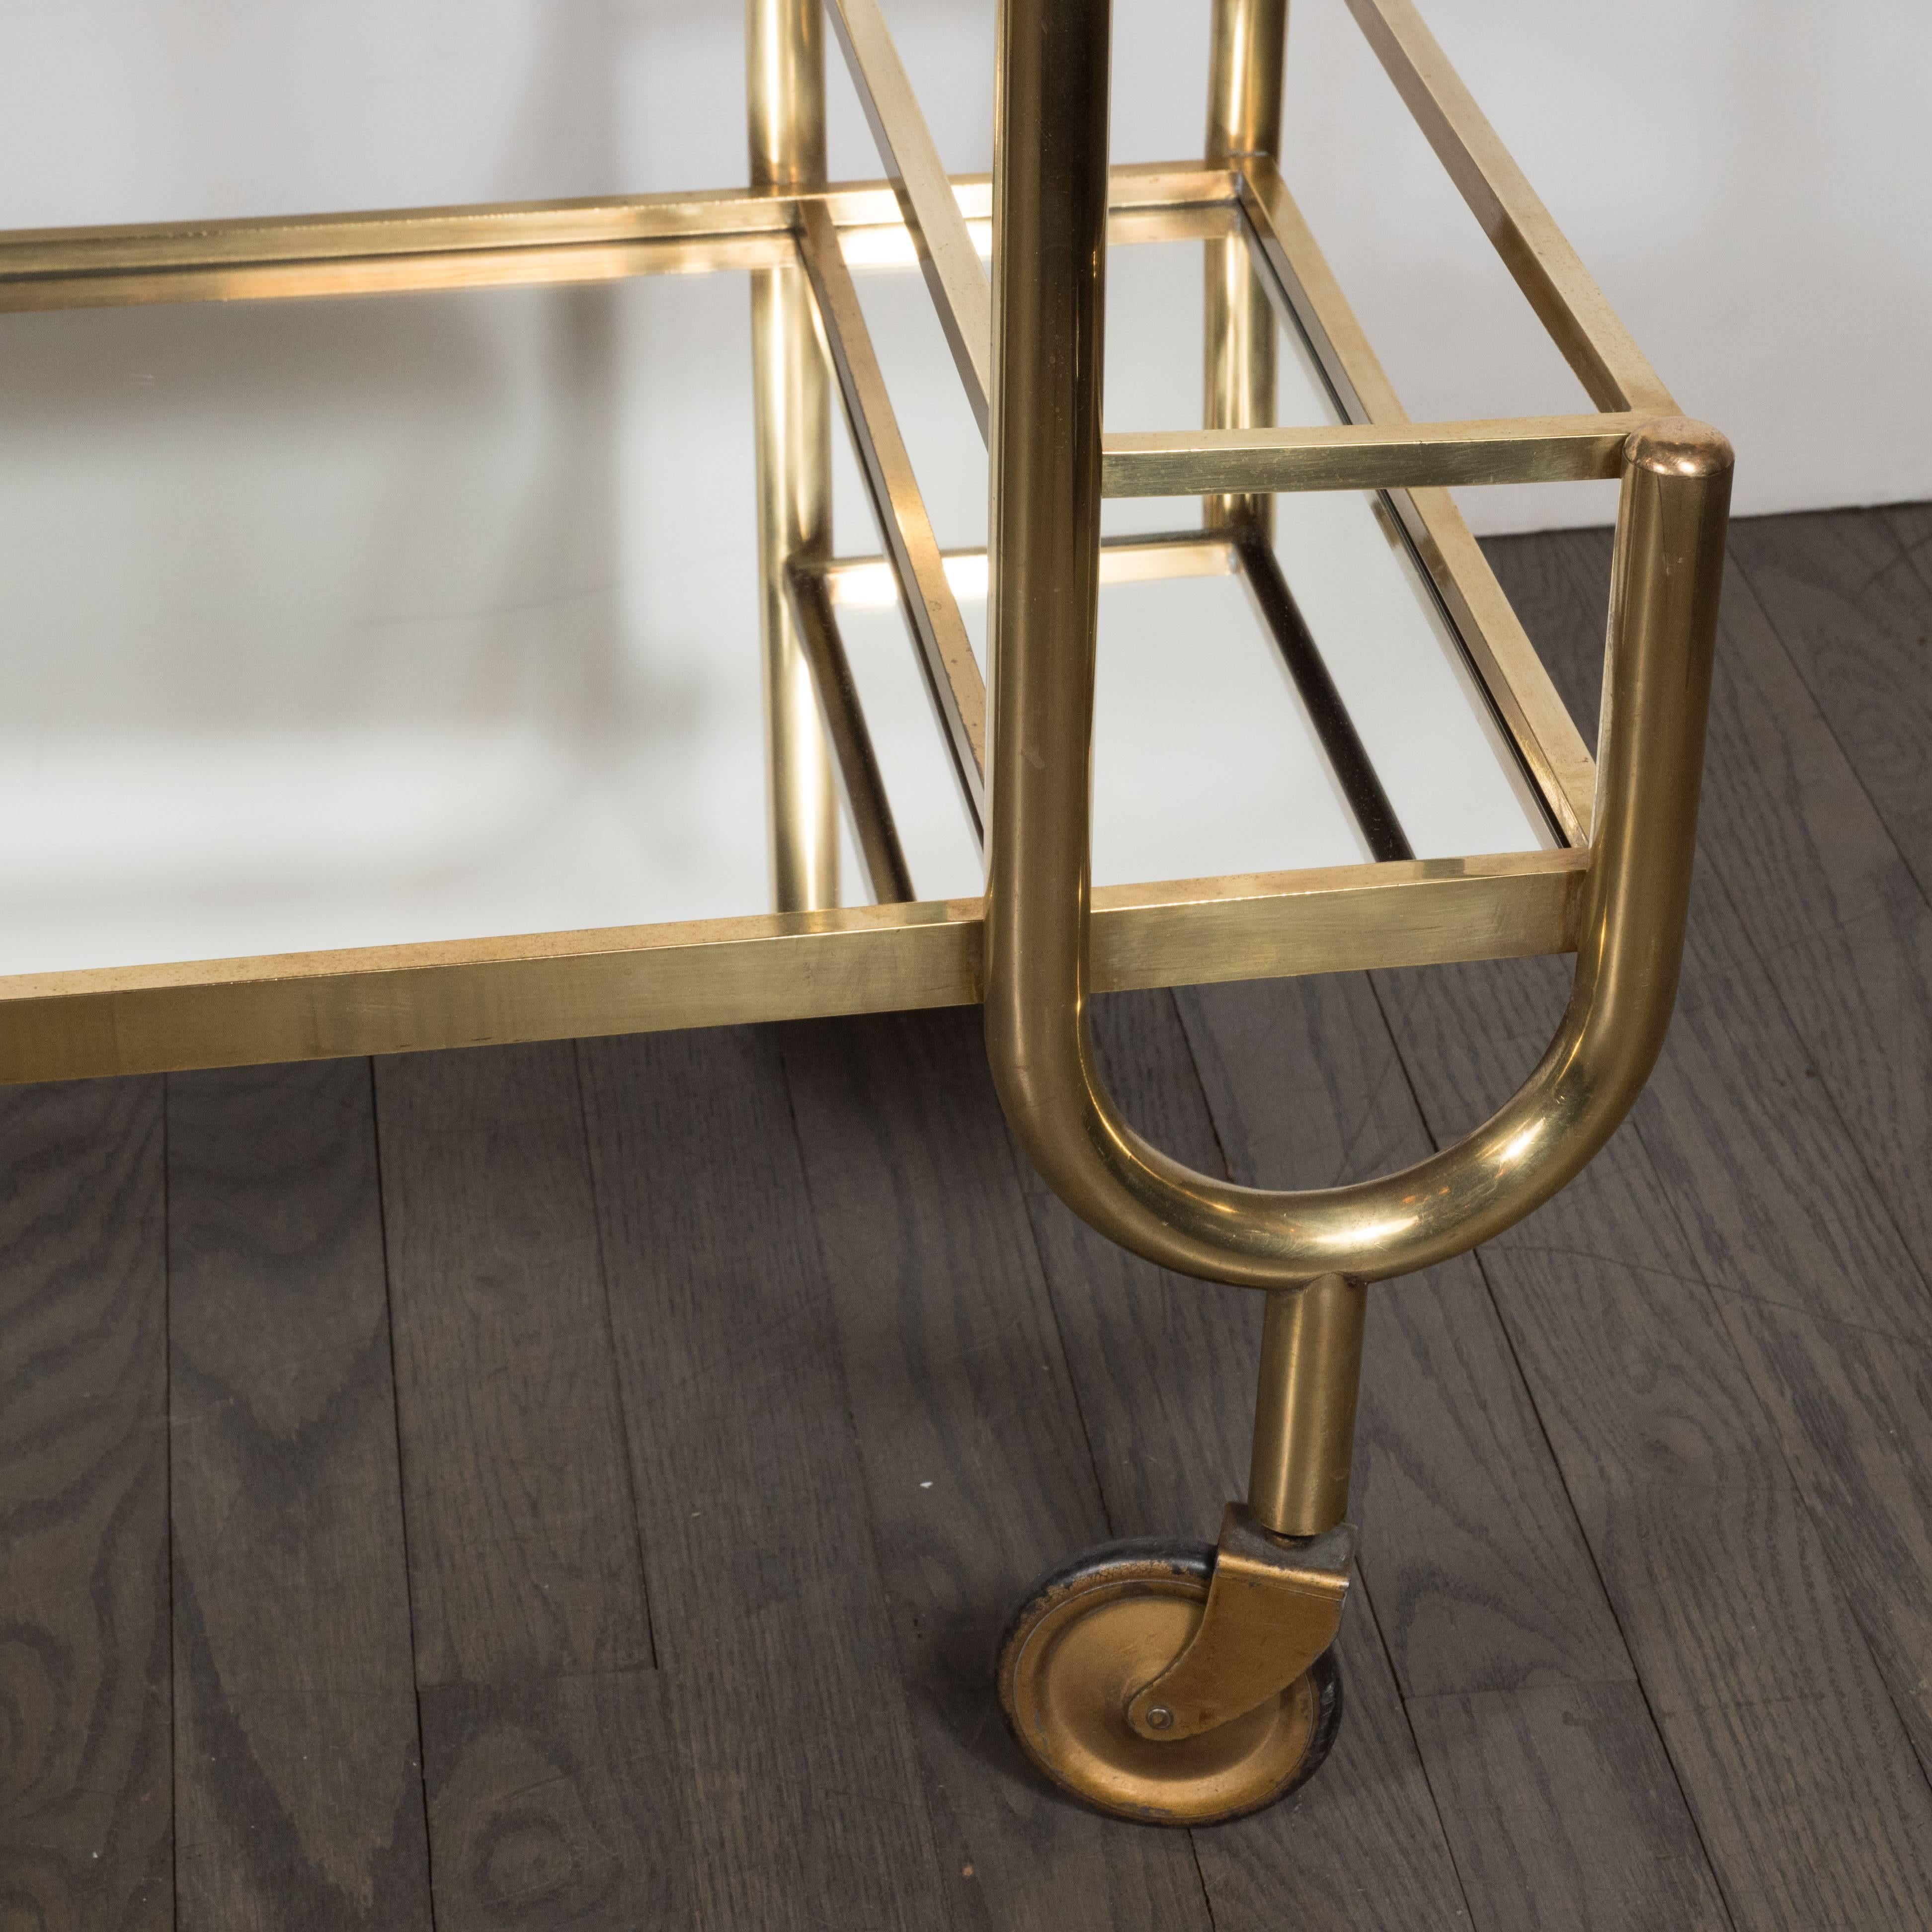 Italian Mid-Century Modern Brass and Mirrored Glass Bar Cart with Casters 5